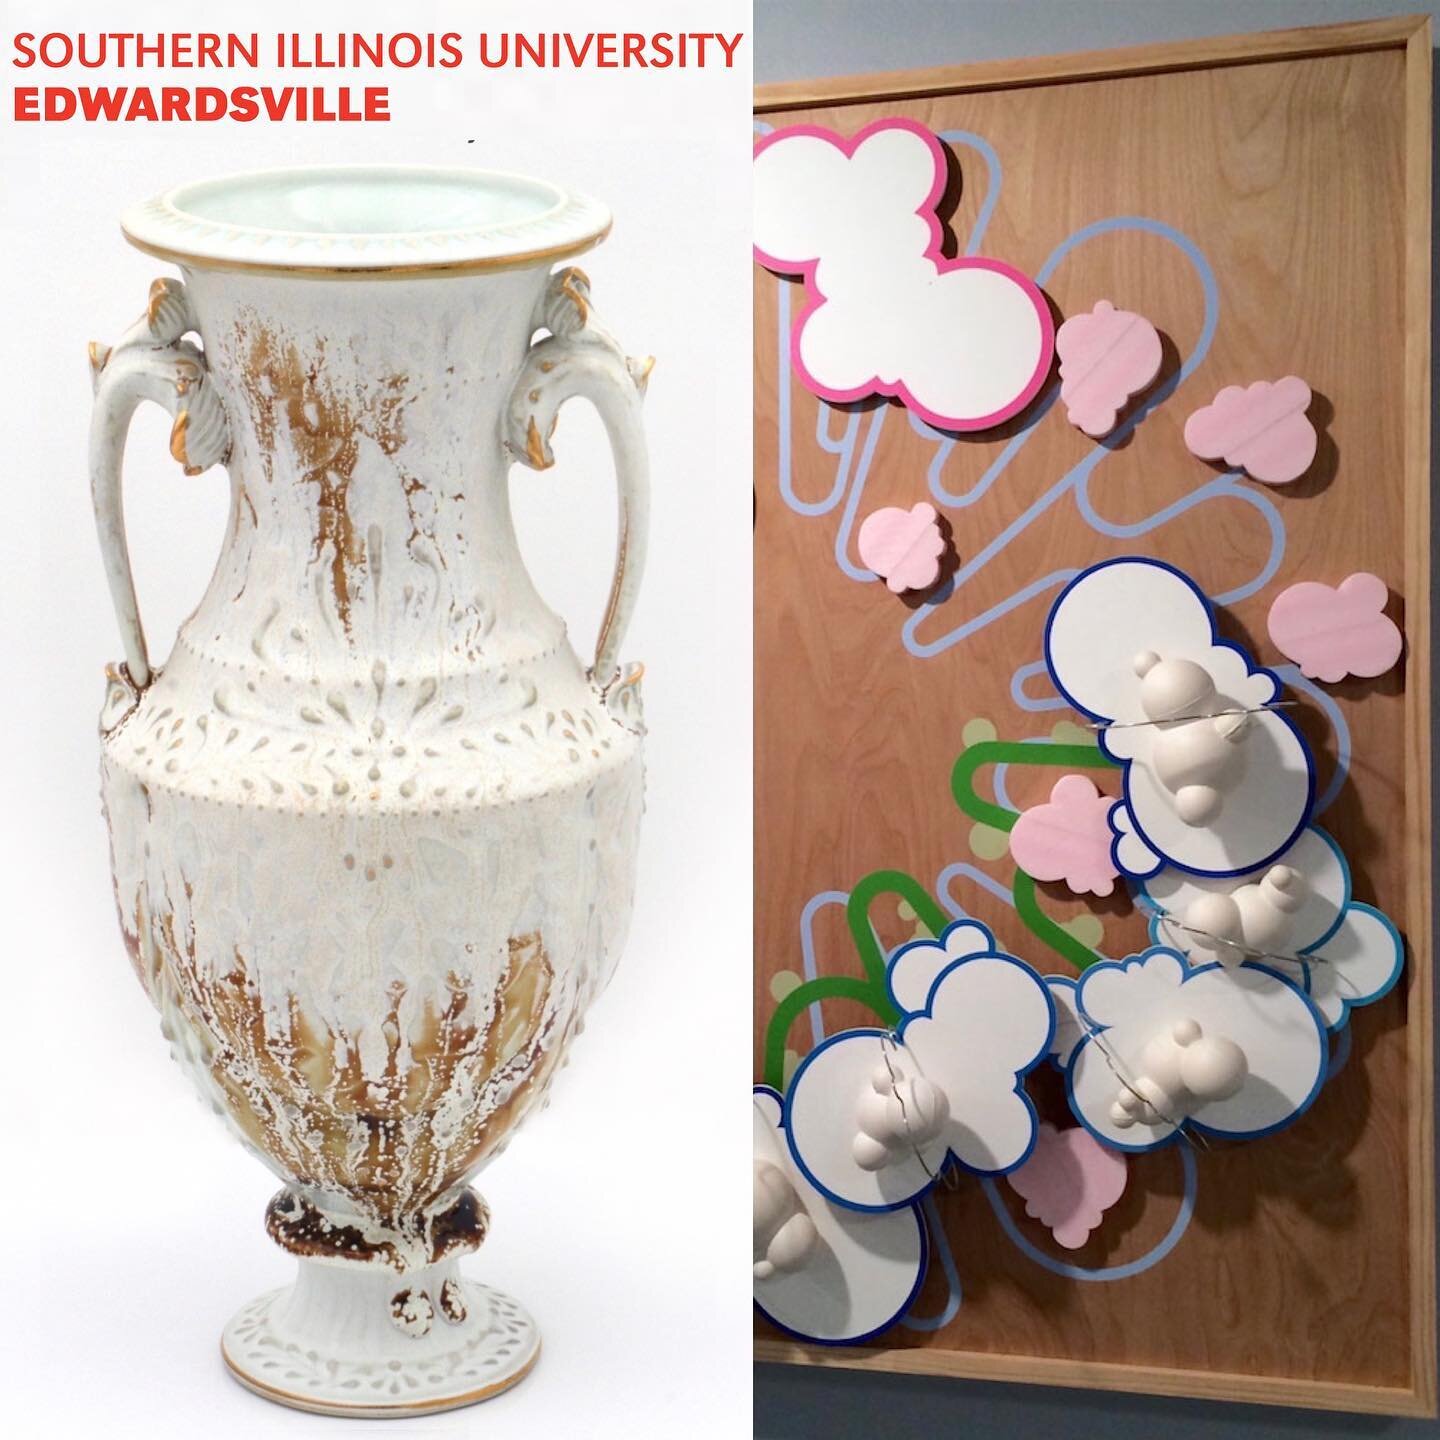 If you are applying or considering applying to graduate school, you absolutely must put SIUE on your list. 
Our three-year MFA program features assistantships, full tuition waivers, incredible facilities, kilns of all types, proximity to St Louis, an